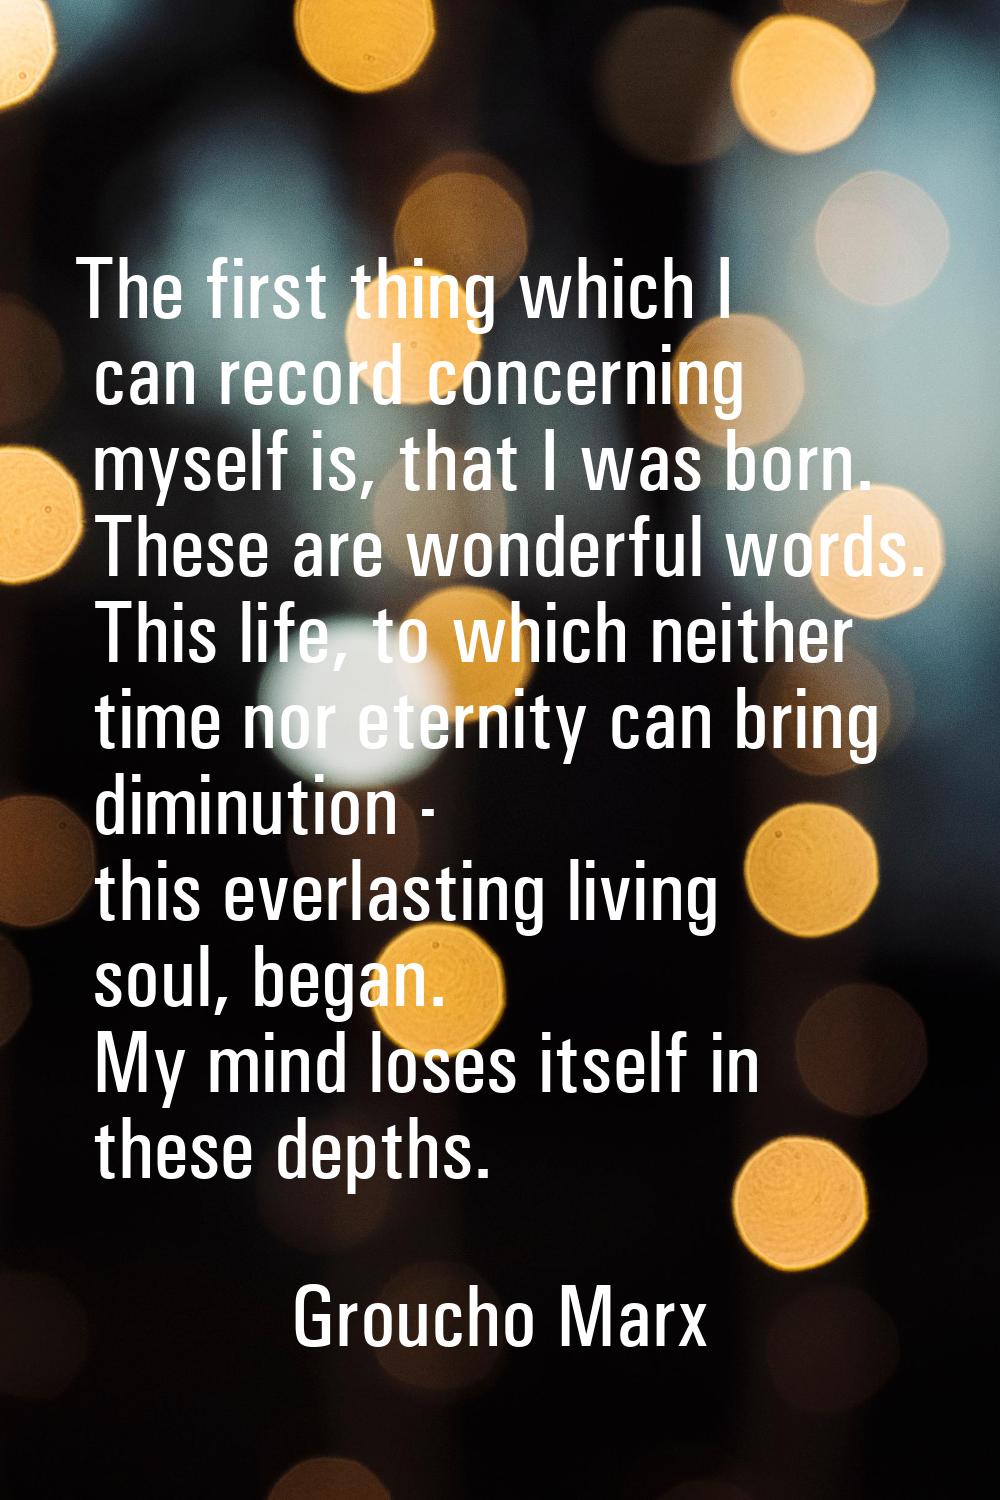 The first thing which I can record concerning myself is, that I was born. These are wonderful words